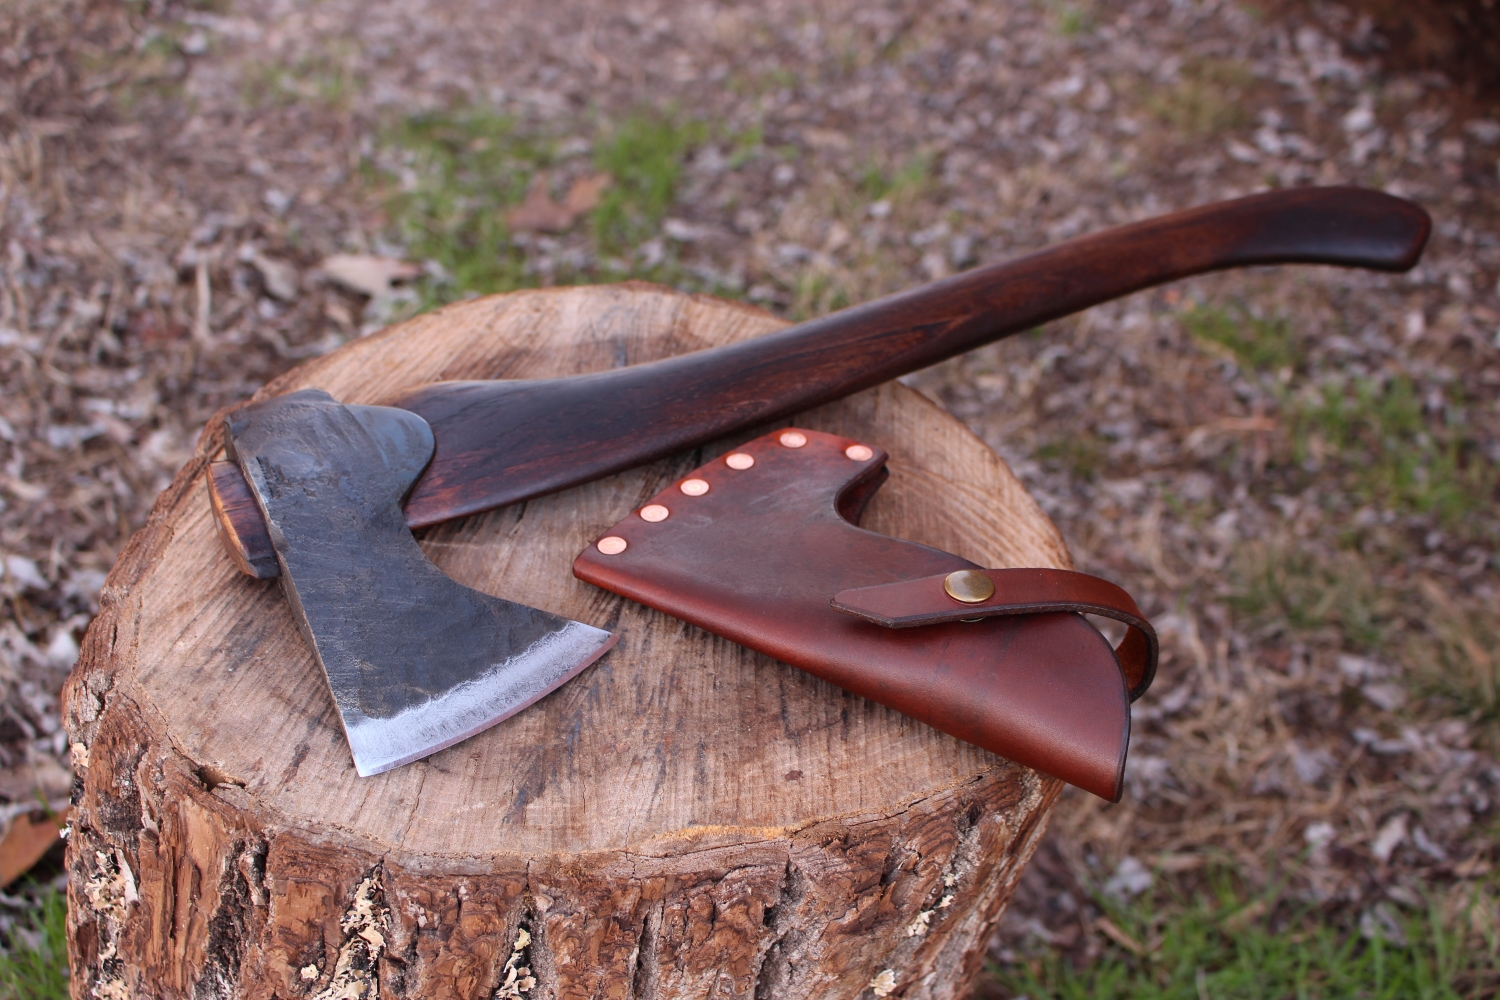 handmade, usa made, usa made axe, hatchet, chopping, wood chopping, outdoor, outdoorsman, survival, backwoodsman, hickory, axe made in america, axes made in the usa, ike bullington, wolf valley forge, valley forge, pack axe, back packing, camping, trail axe, hunting axe, trappers axe, camp axe, bush axe, belt axe, pack axe, leather shoulder rig, chopping axe, leather axe carrier, shoulder sling for axe, carpenter's axe, Wolf Valley Forge, Wolf Valley Forge axe release, Axe Wax, haversack, go back, man purse, man bag, canvas bag, reenactor, reenacting